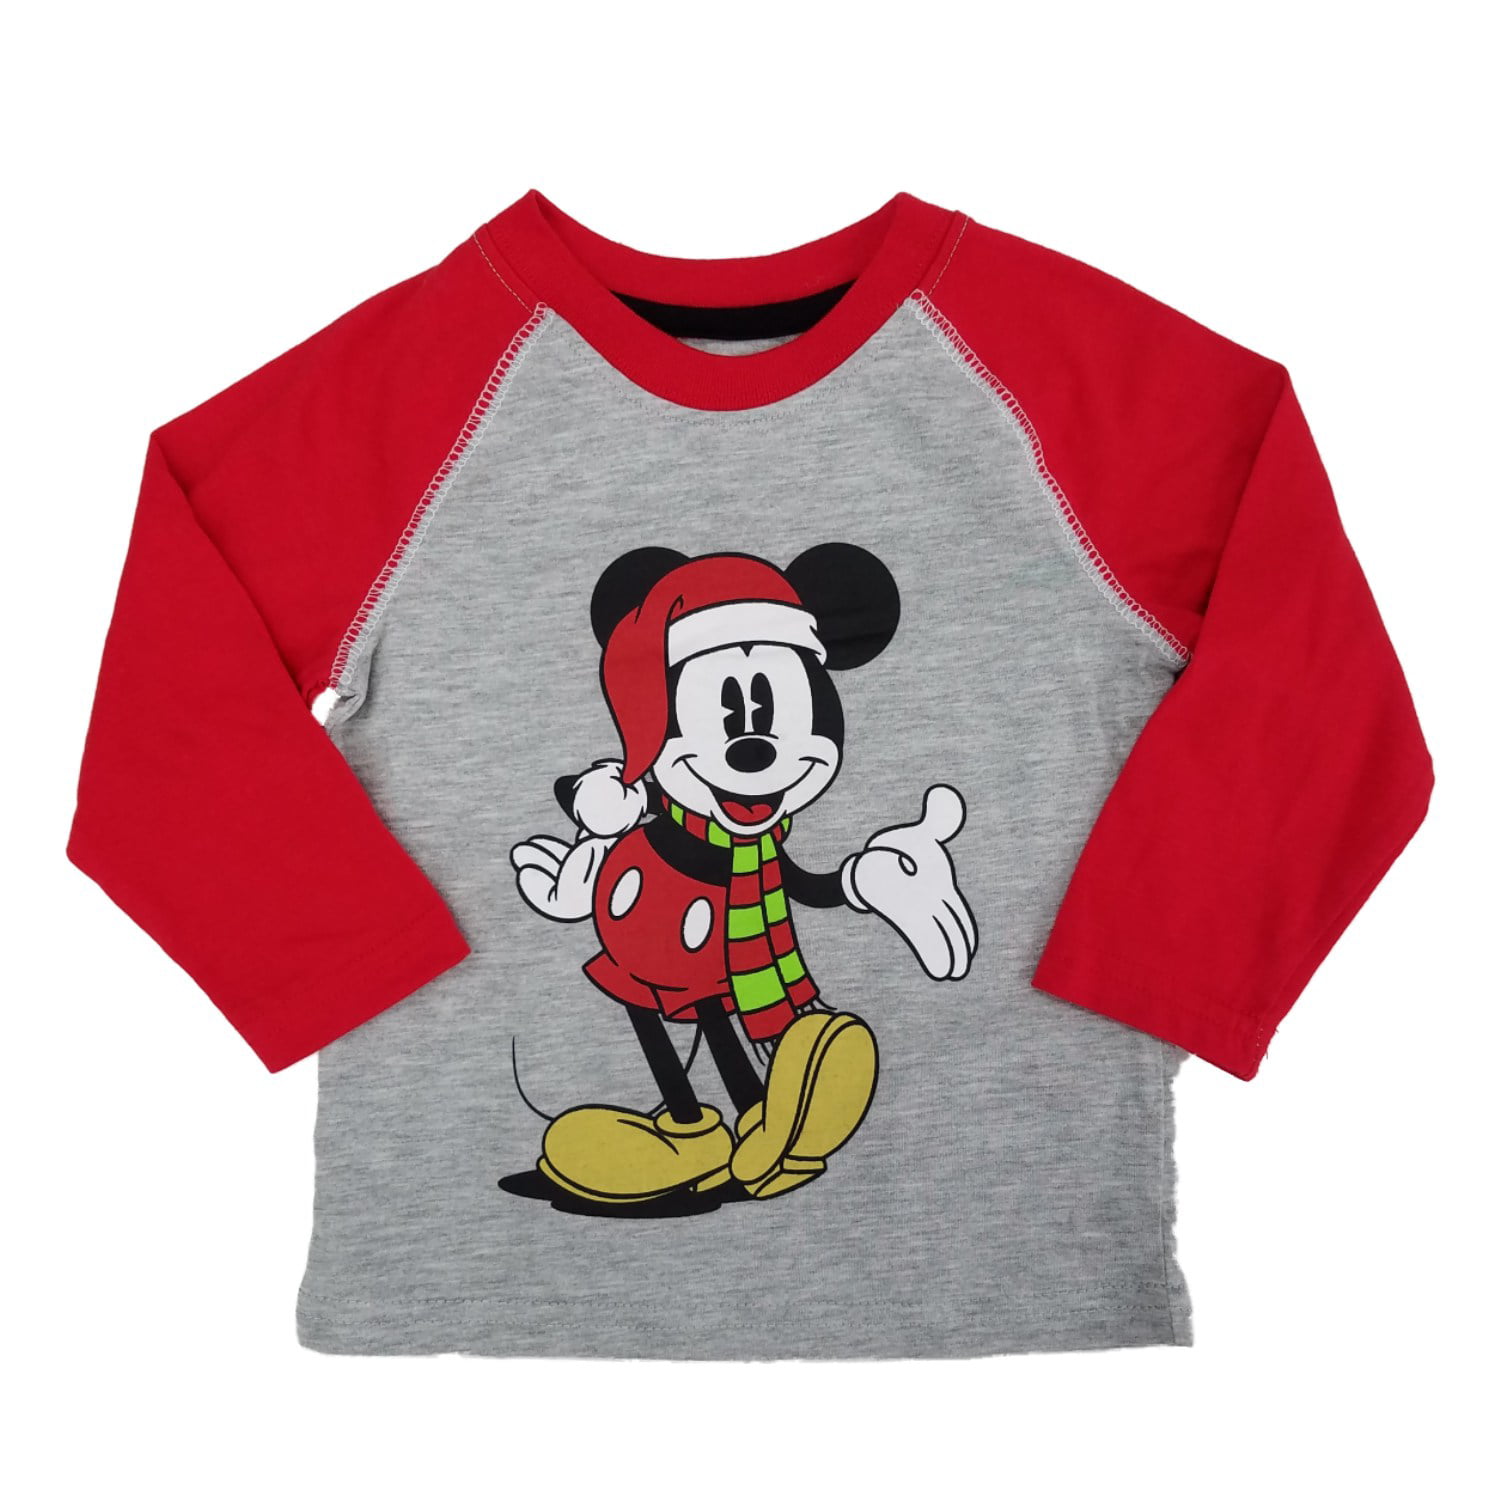 DISNEY MICKEY MOUSE CHRISTMAS ANTLERS PERSONALIZED*****T-SHIRT IRON ON TRANSFER 